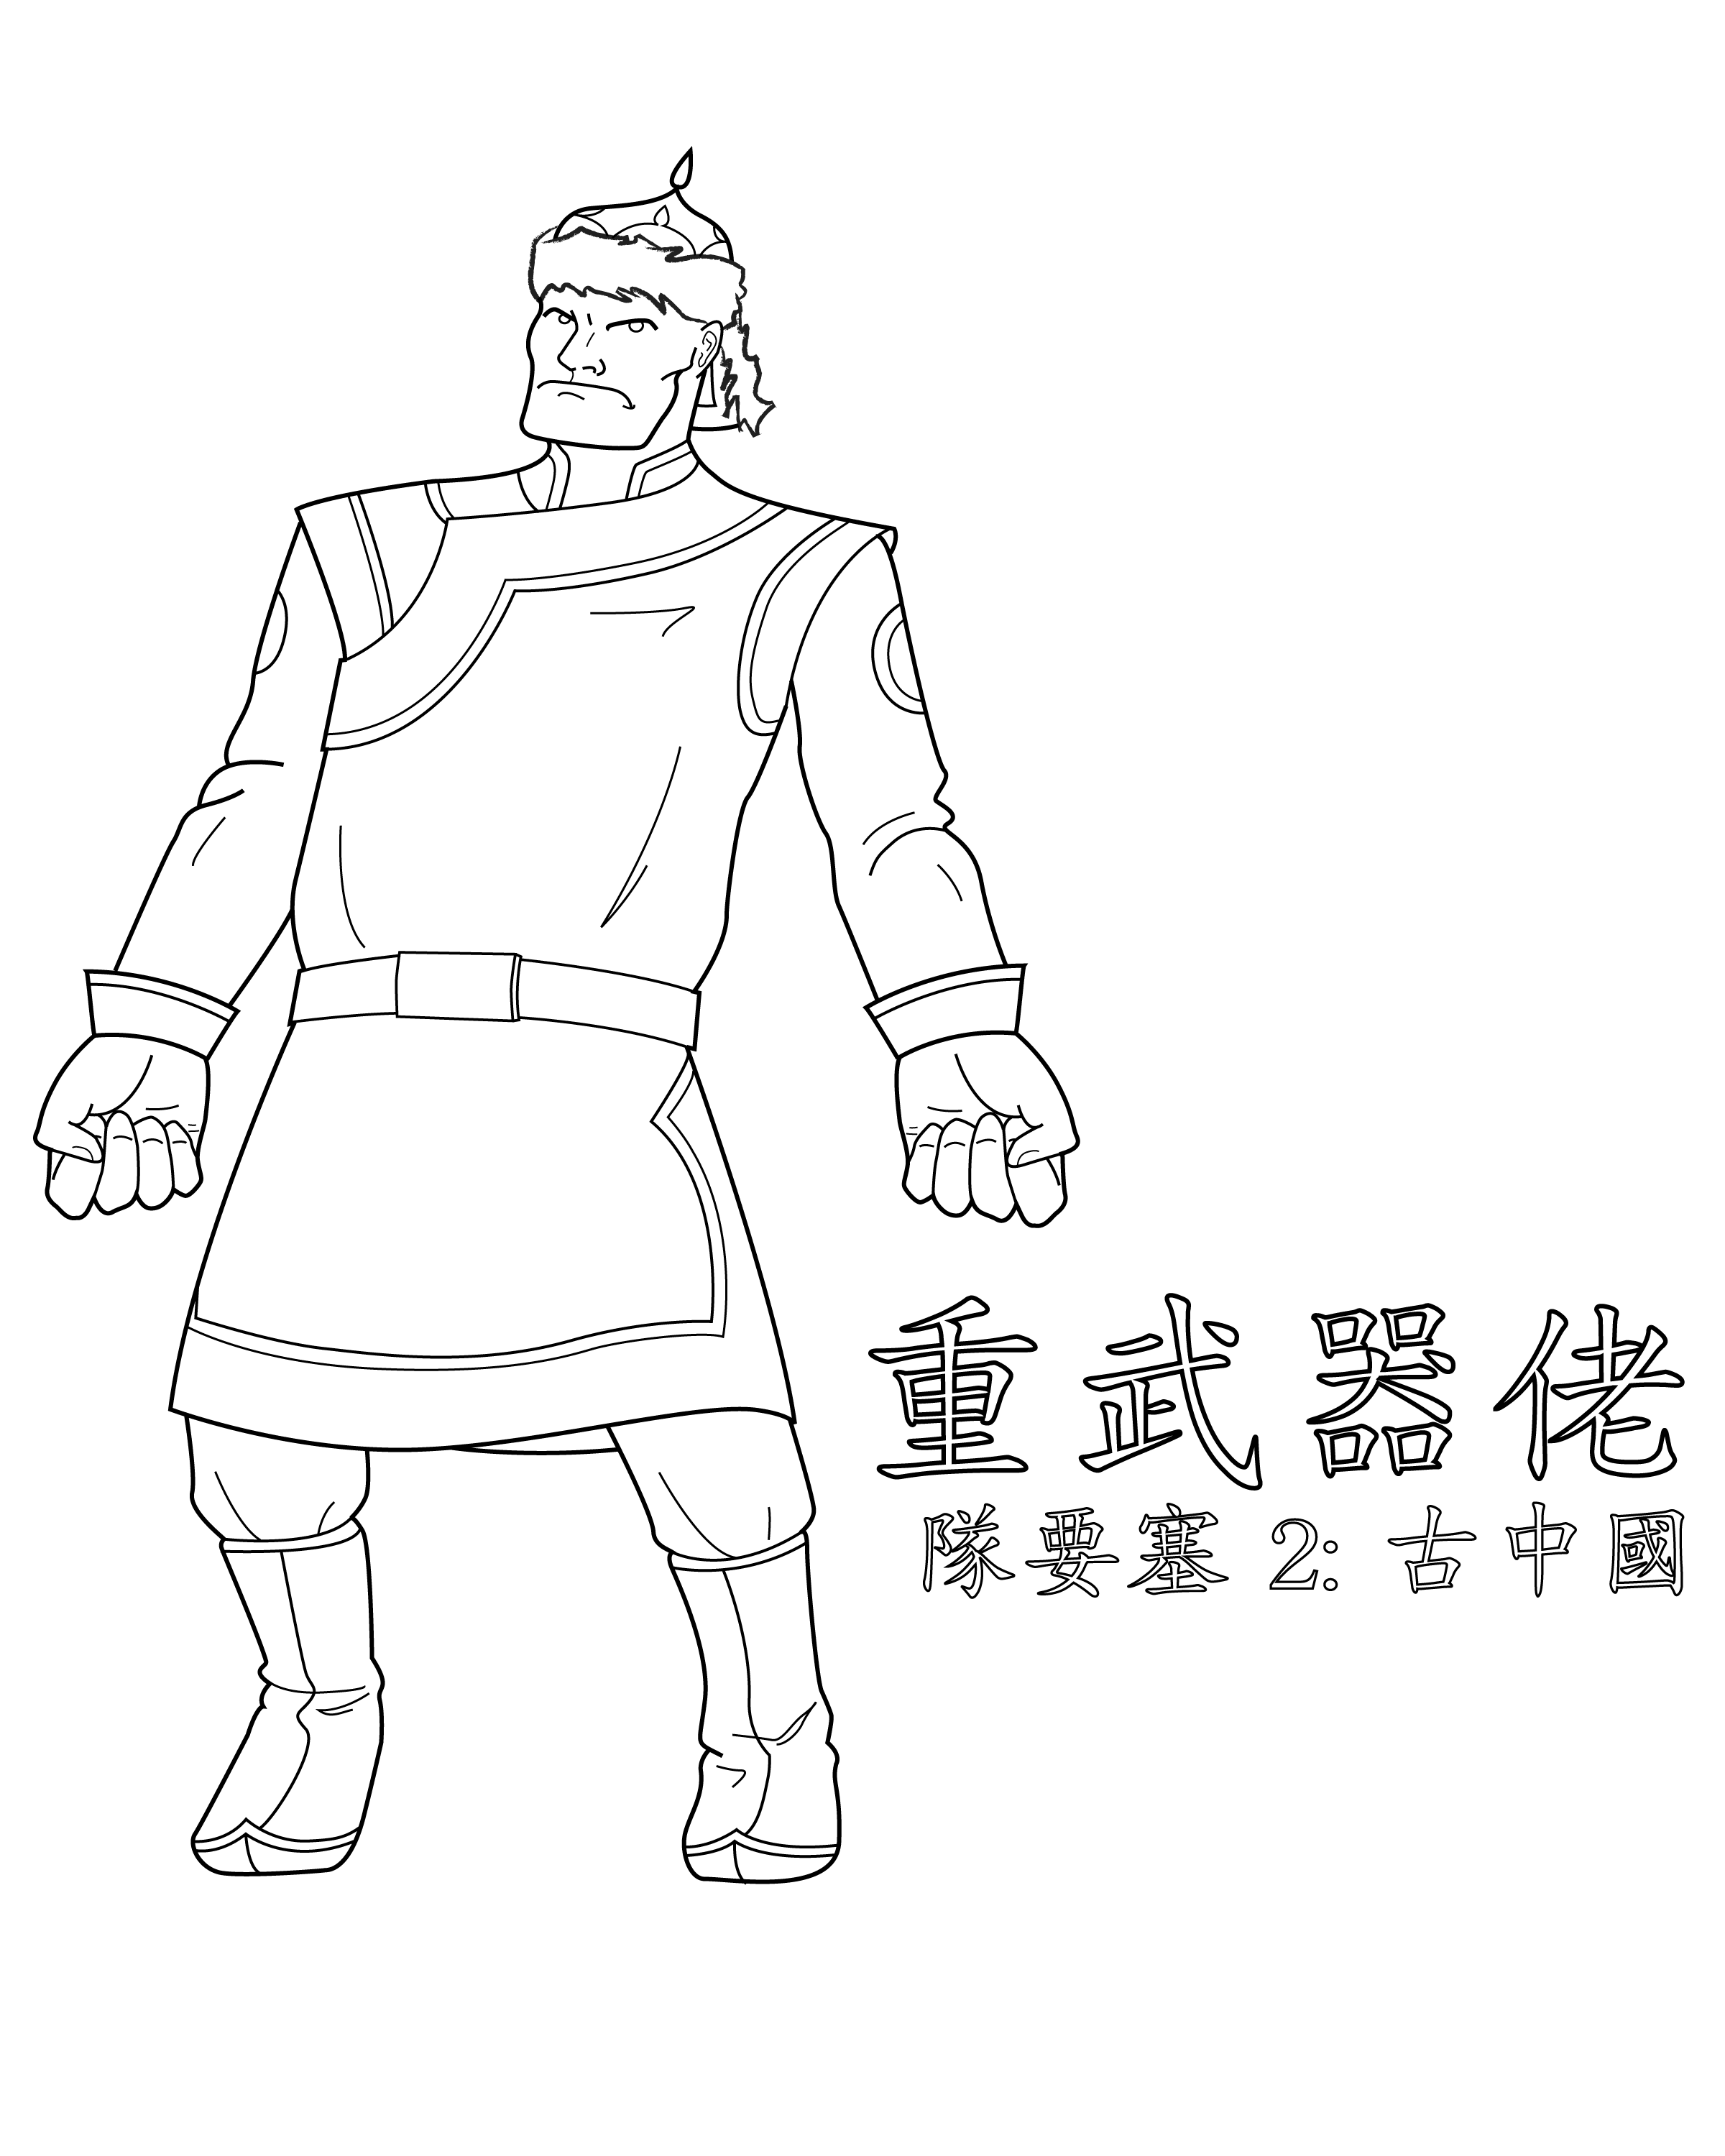 Ancient China Confucius Coloring Page - Ð¡oloring Pages For All Ages